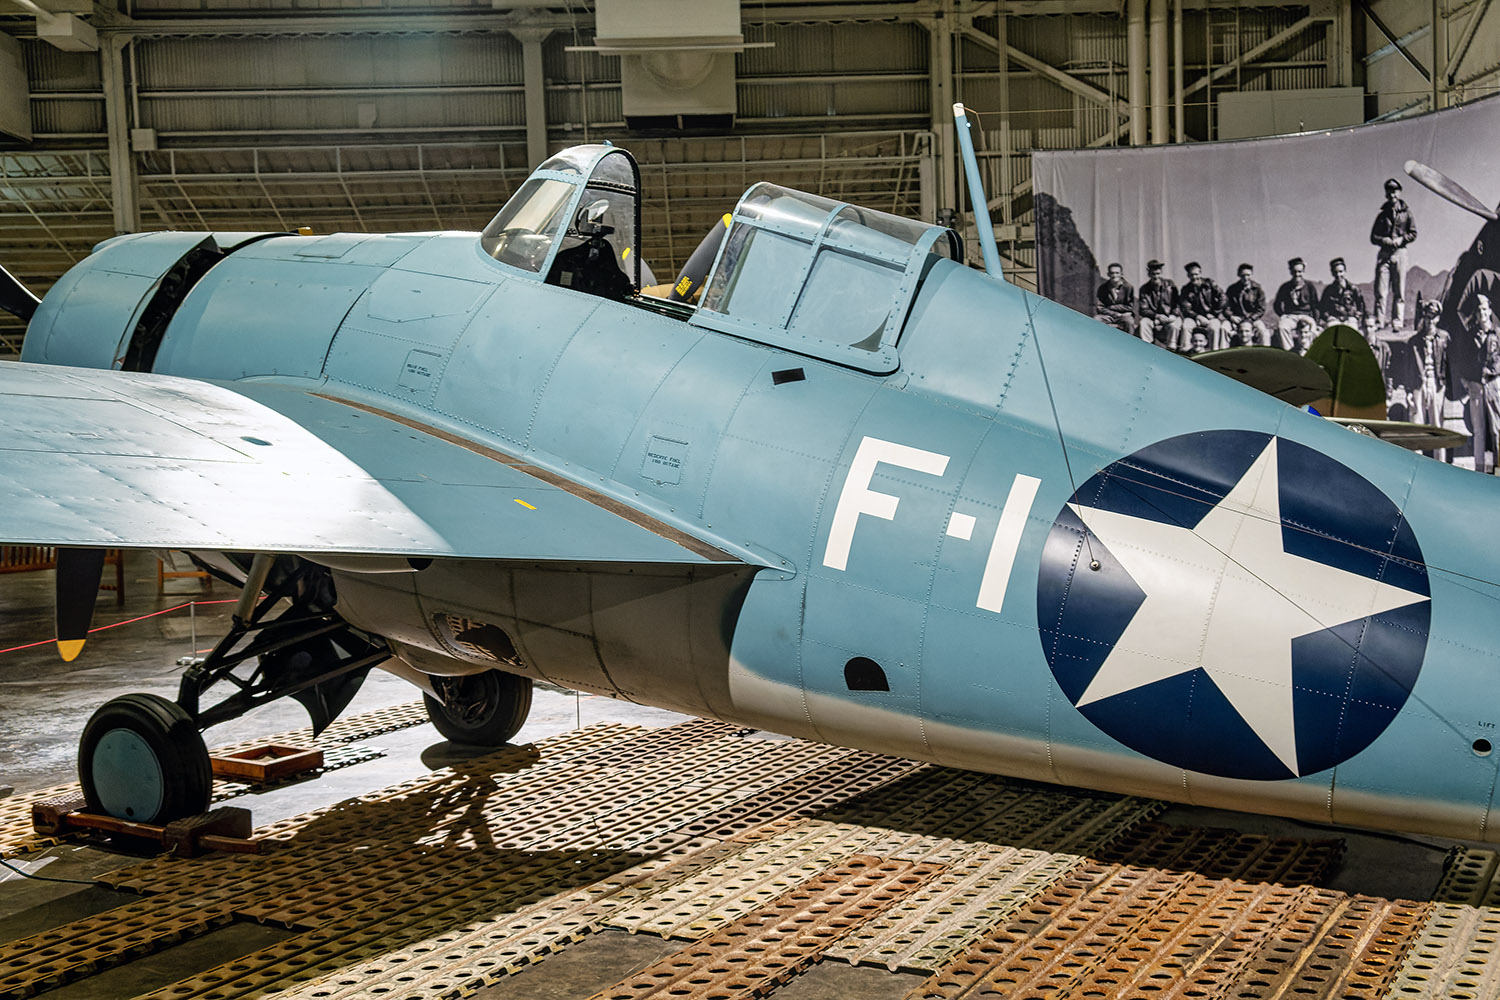 The Grumman F4F Wildcat was the only effective US fighter plane in the Pacific during the early part of WW II